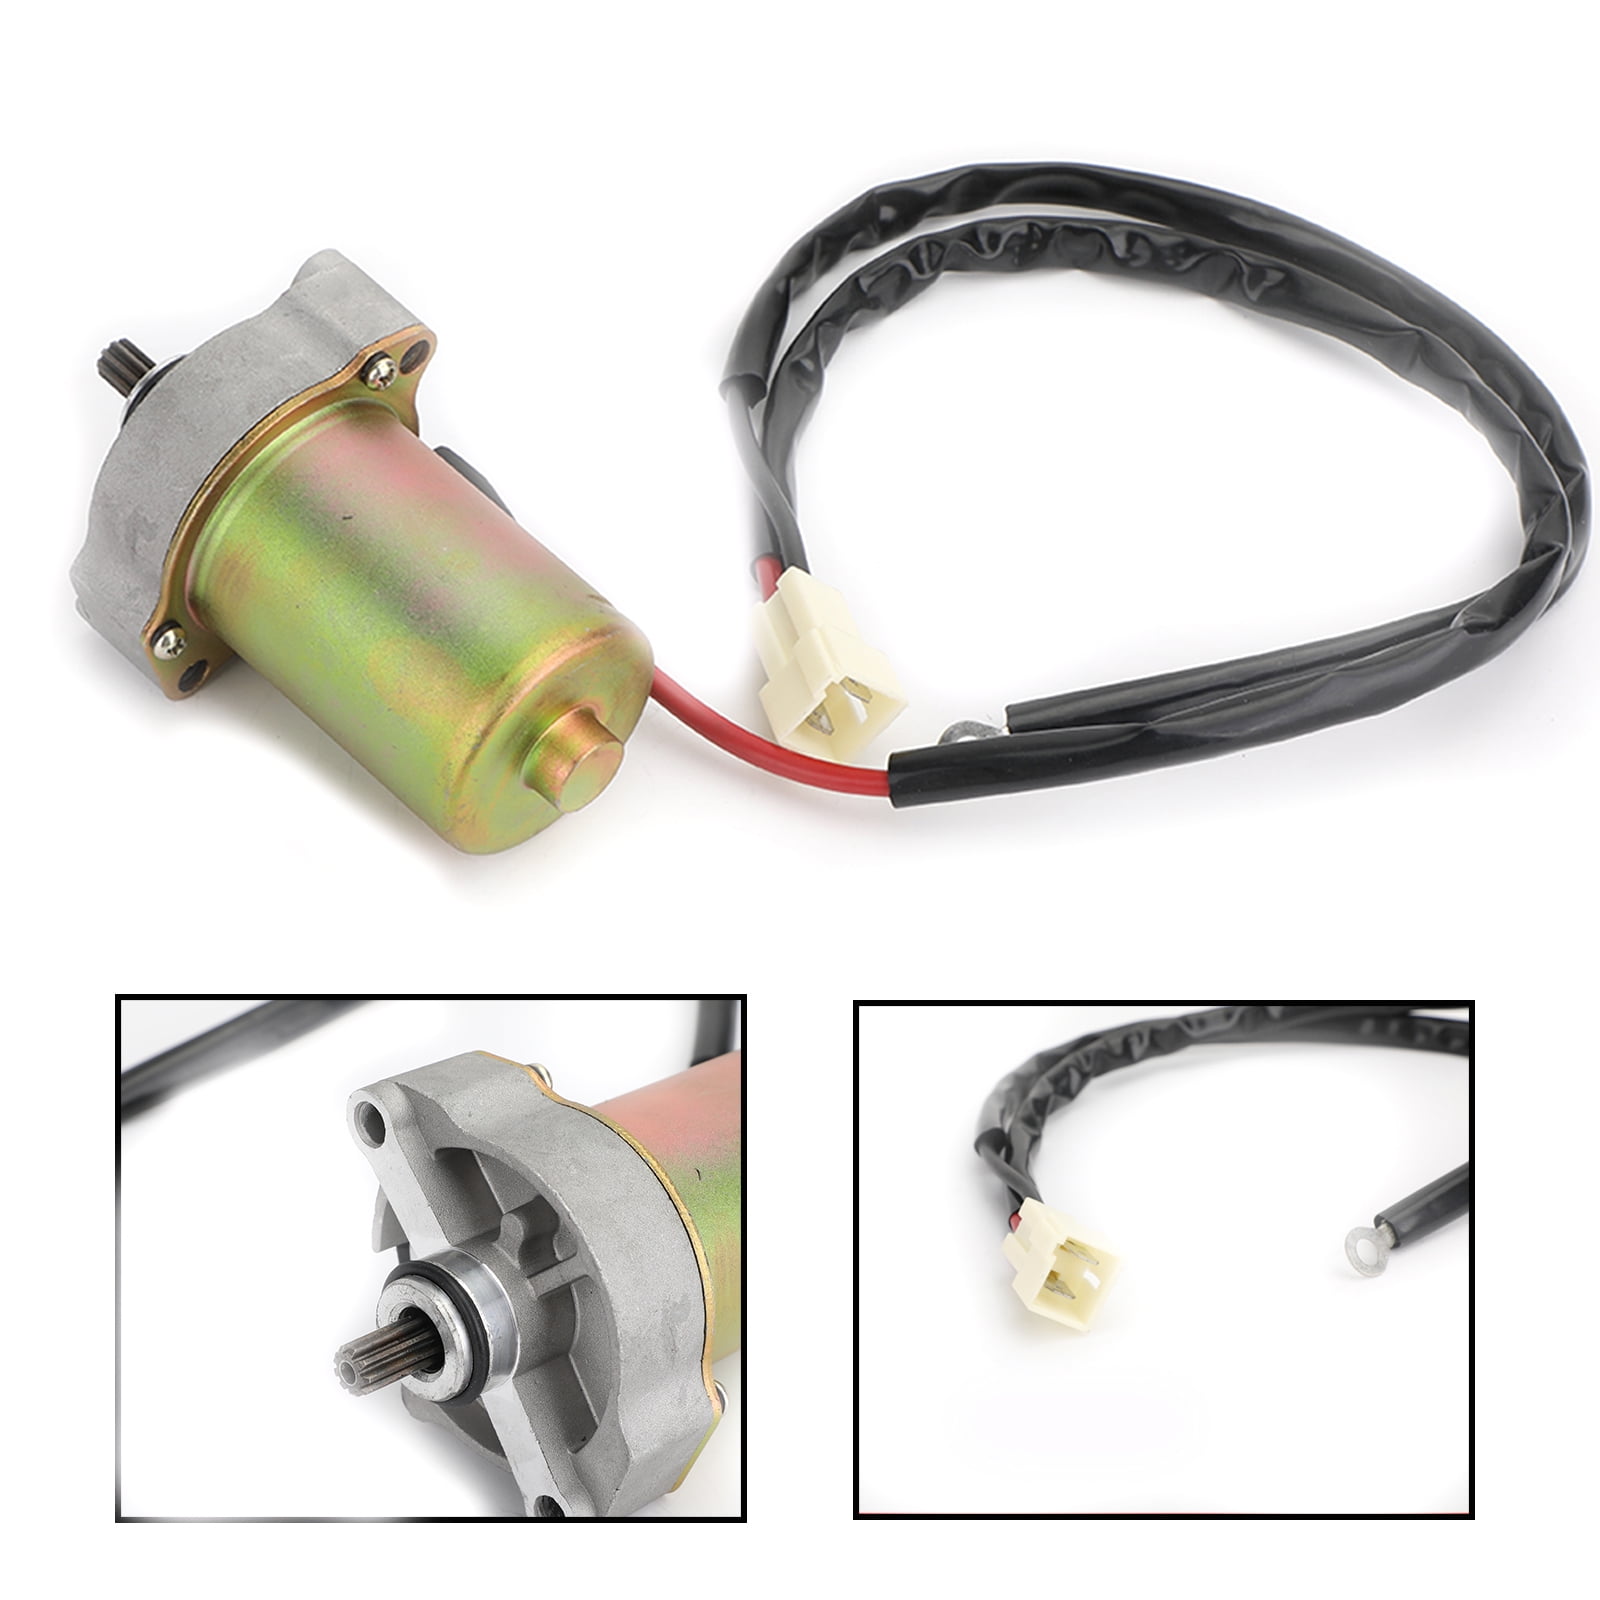 TTRS Store Starter Electrical Engine Motor Fit for Polaris Outlaw Predator 50 0453848 0454951 Electrical Starter